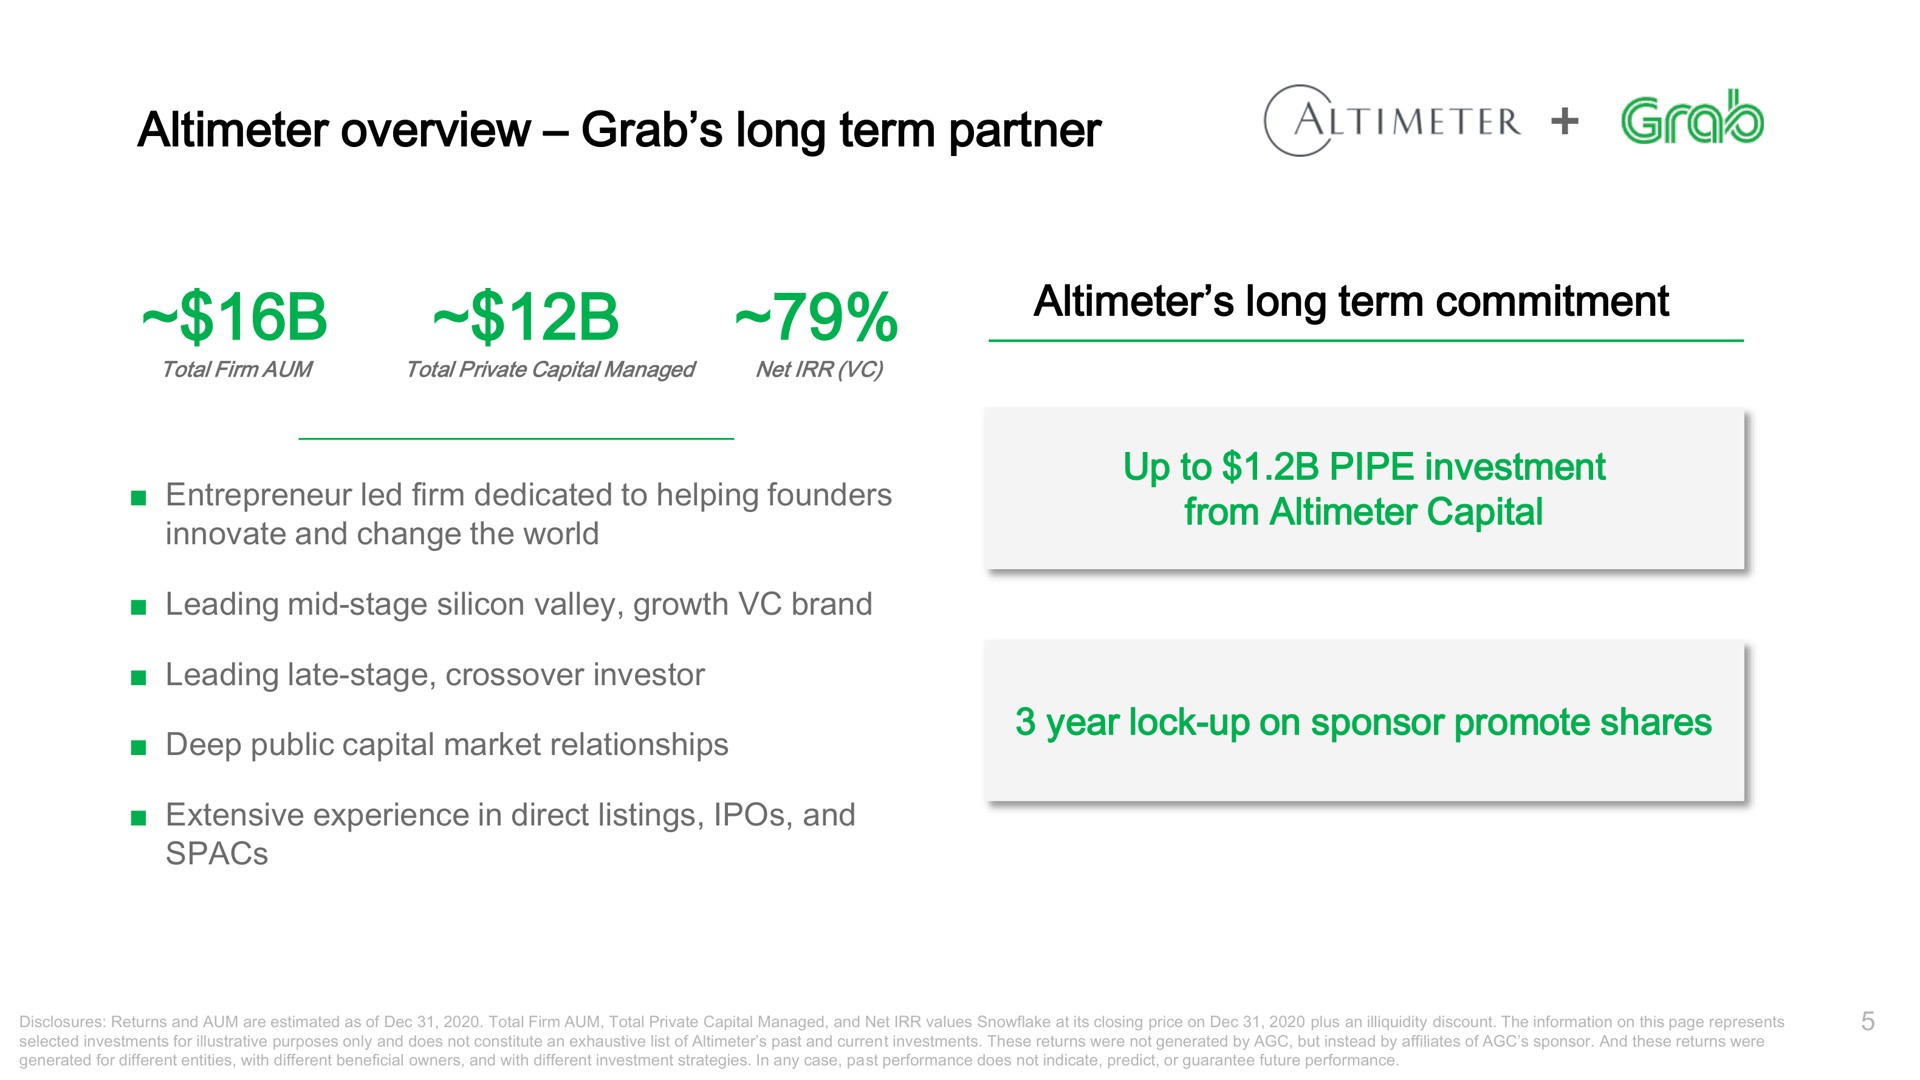 altimeter overview grab long term partner altimeter long term commitment up to pipe investment from altimeter capital year lock up on sponsor promote shares | Grab